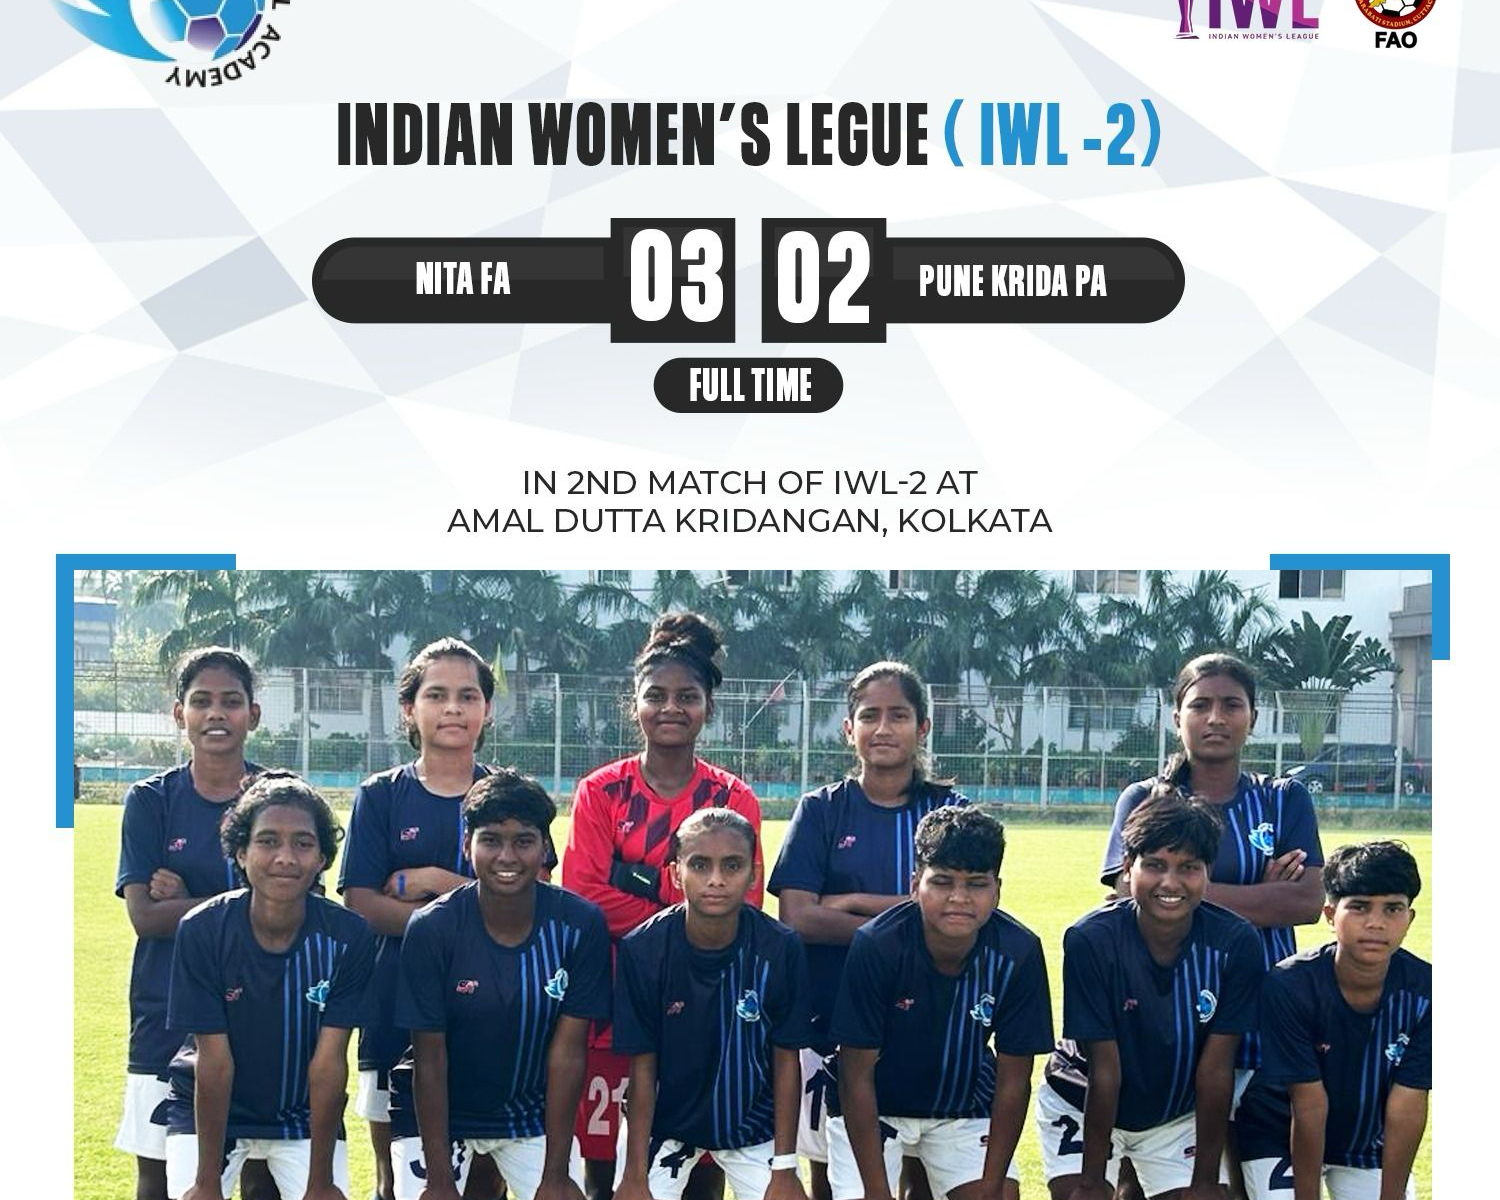 NITA Football Academy emerges victorious with stellar Performances in IWL-2 encounter!